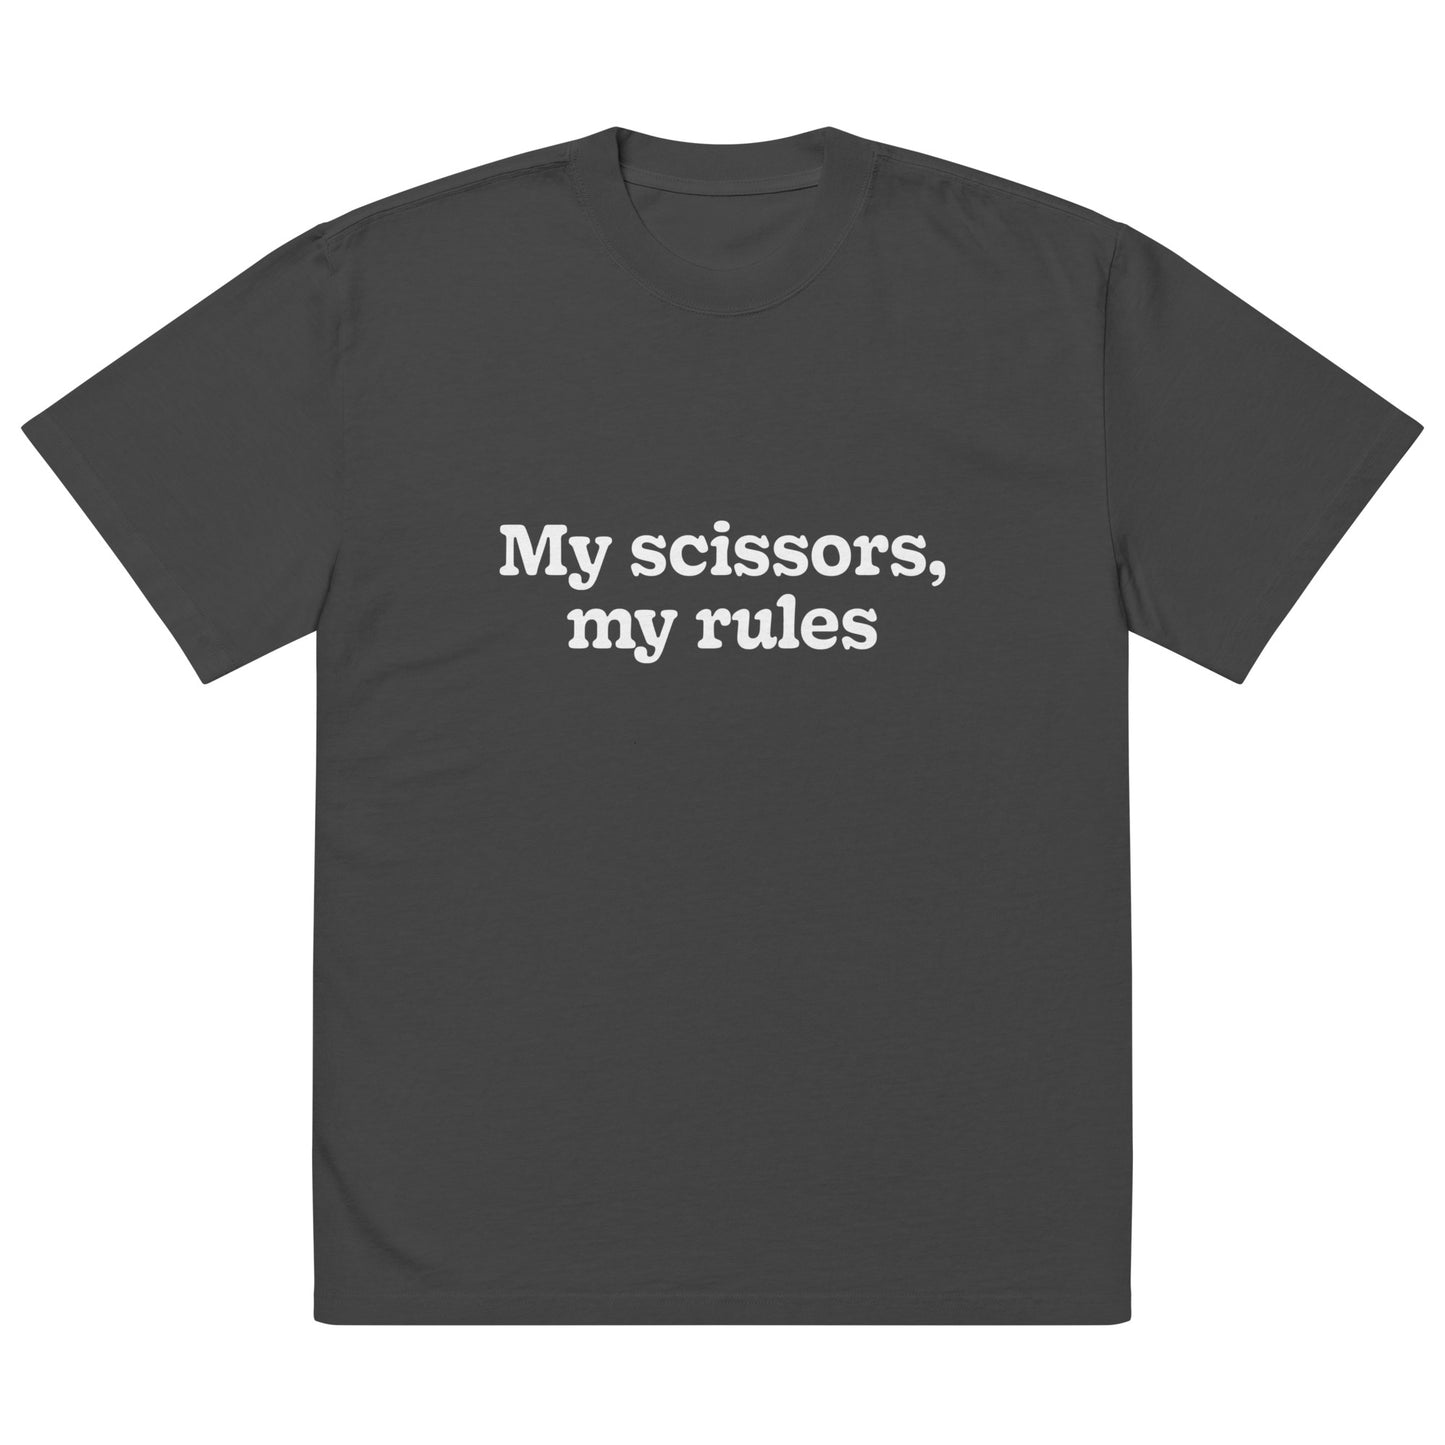 My scissors, my rules. Oversized faded t-shirt